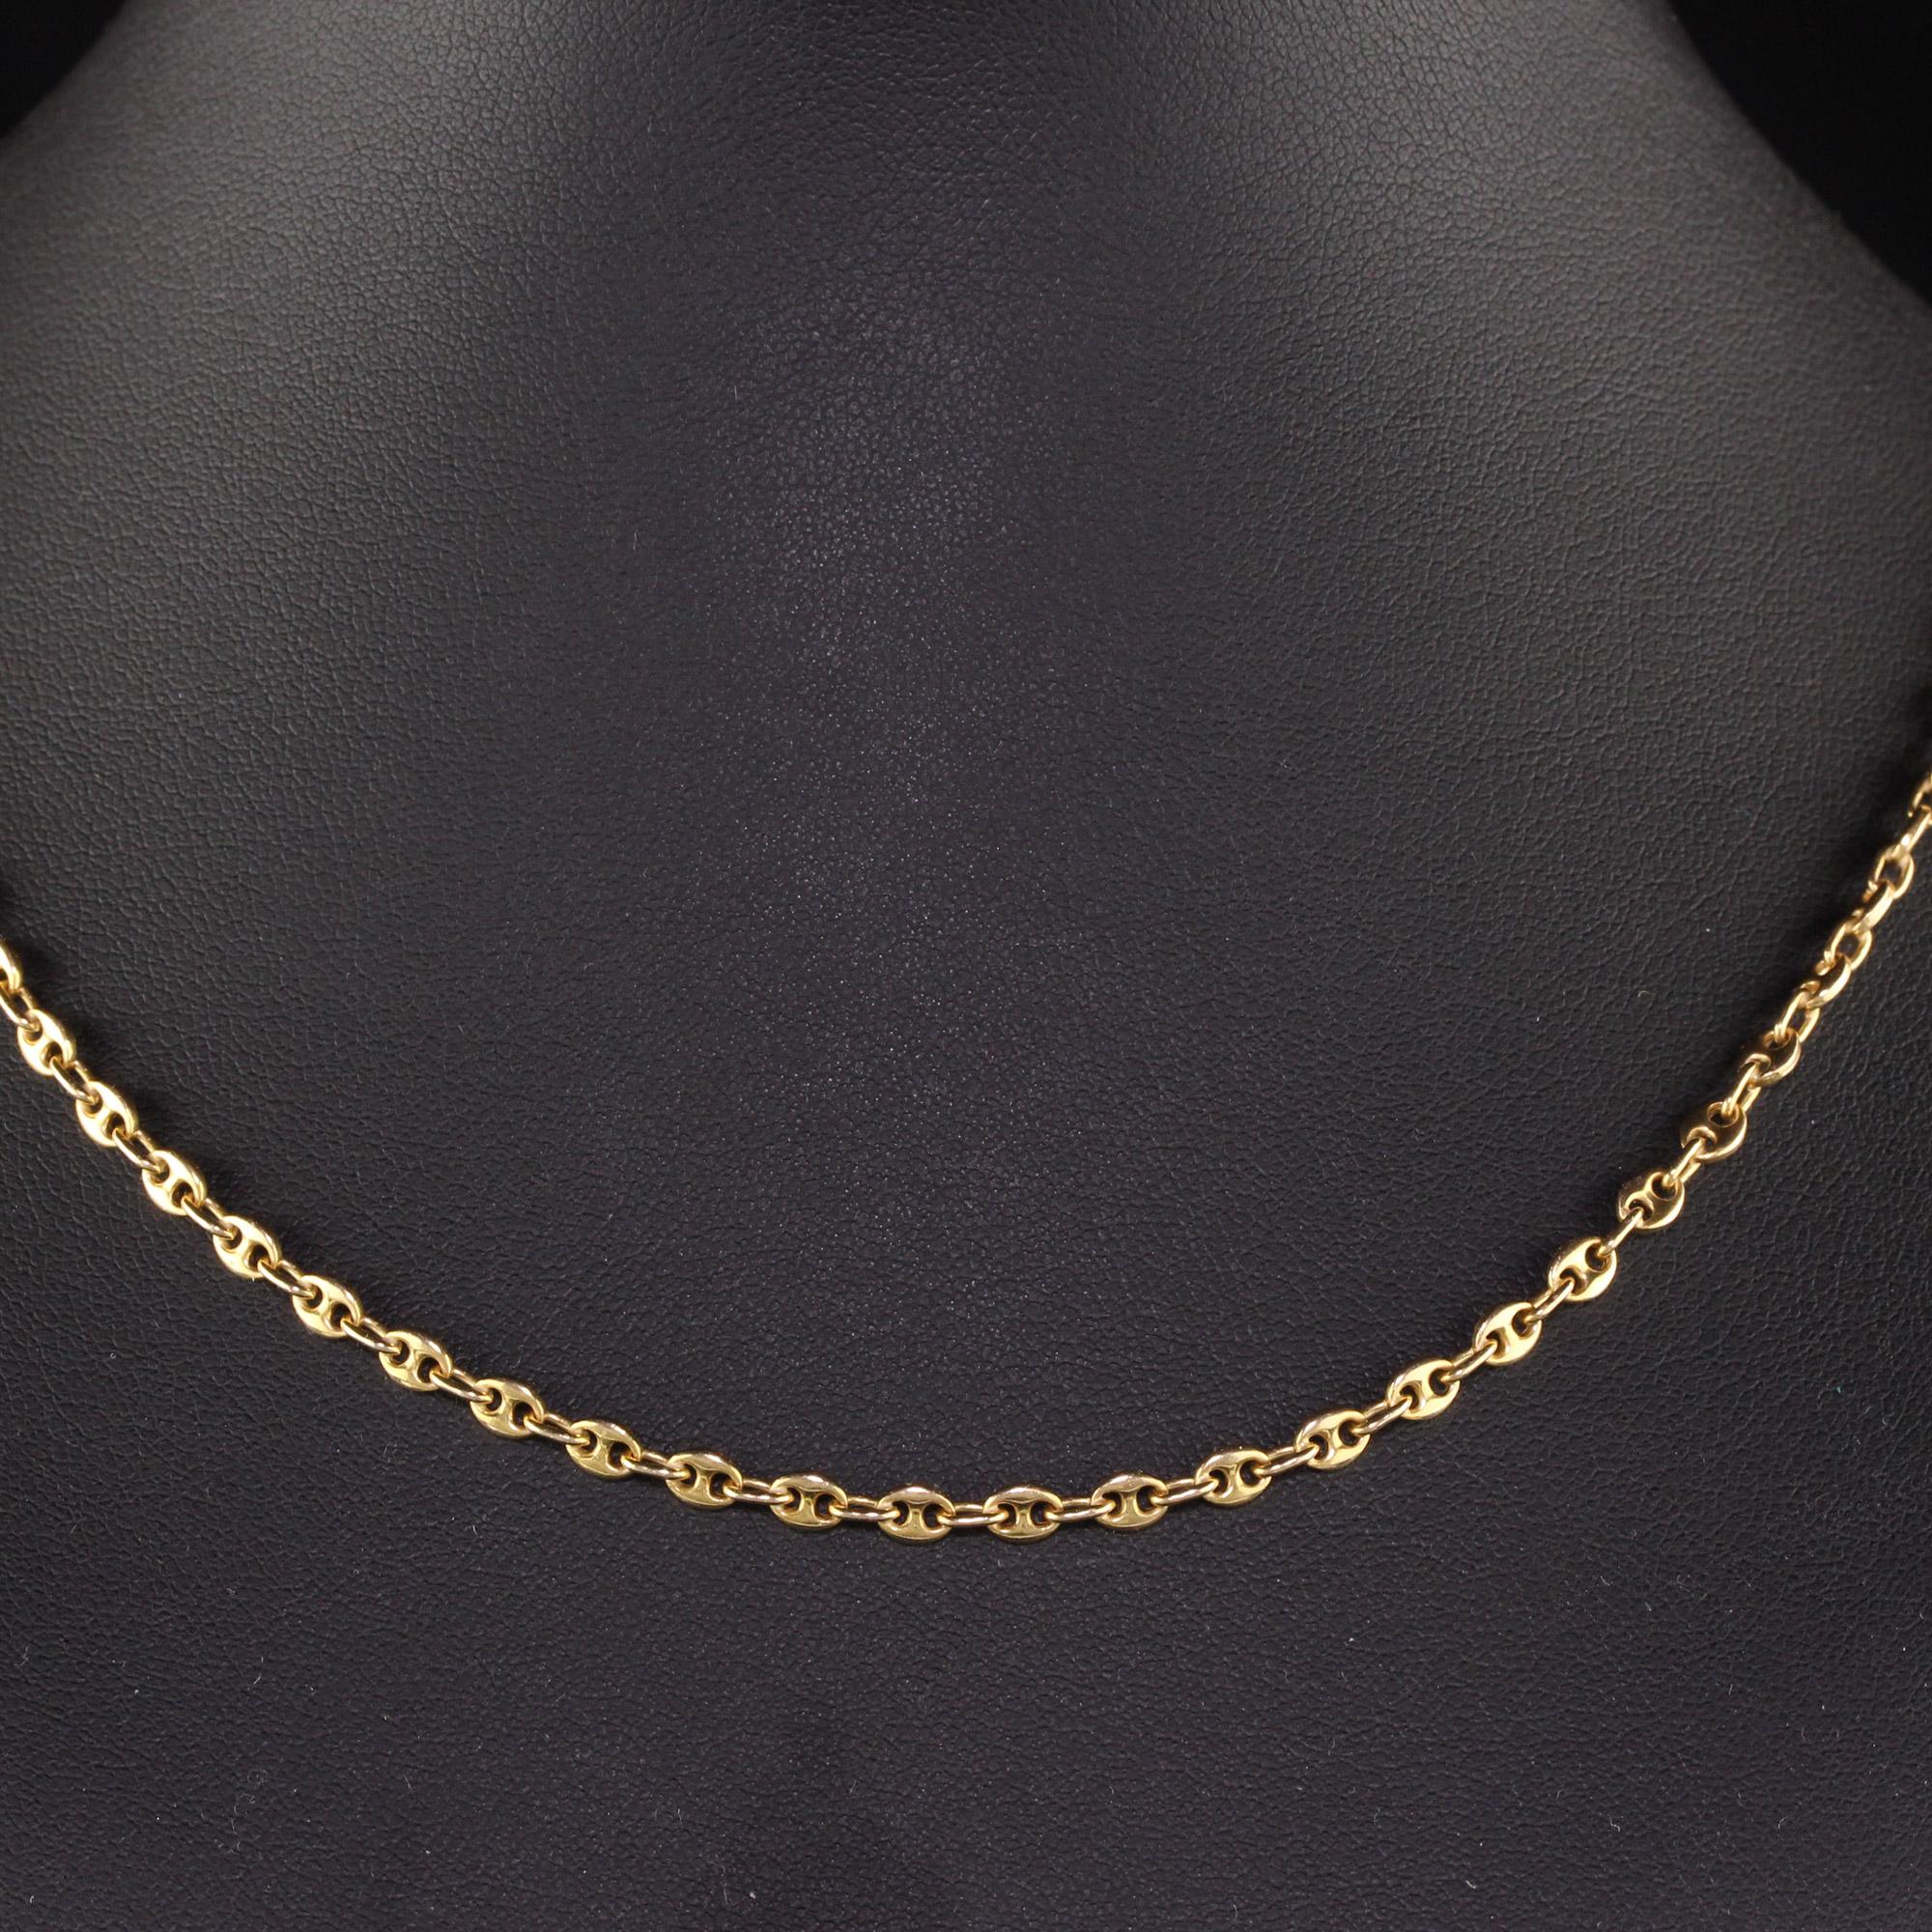 Retro Vintage Estate 18K Yellow Gold Gucci Style Link Necklace